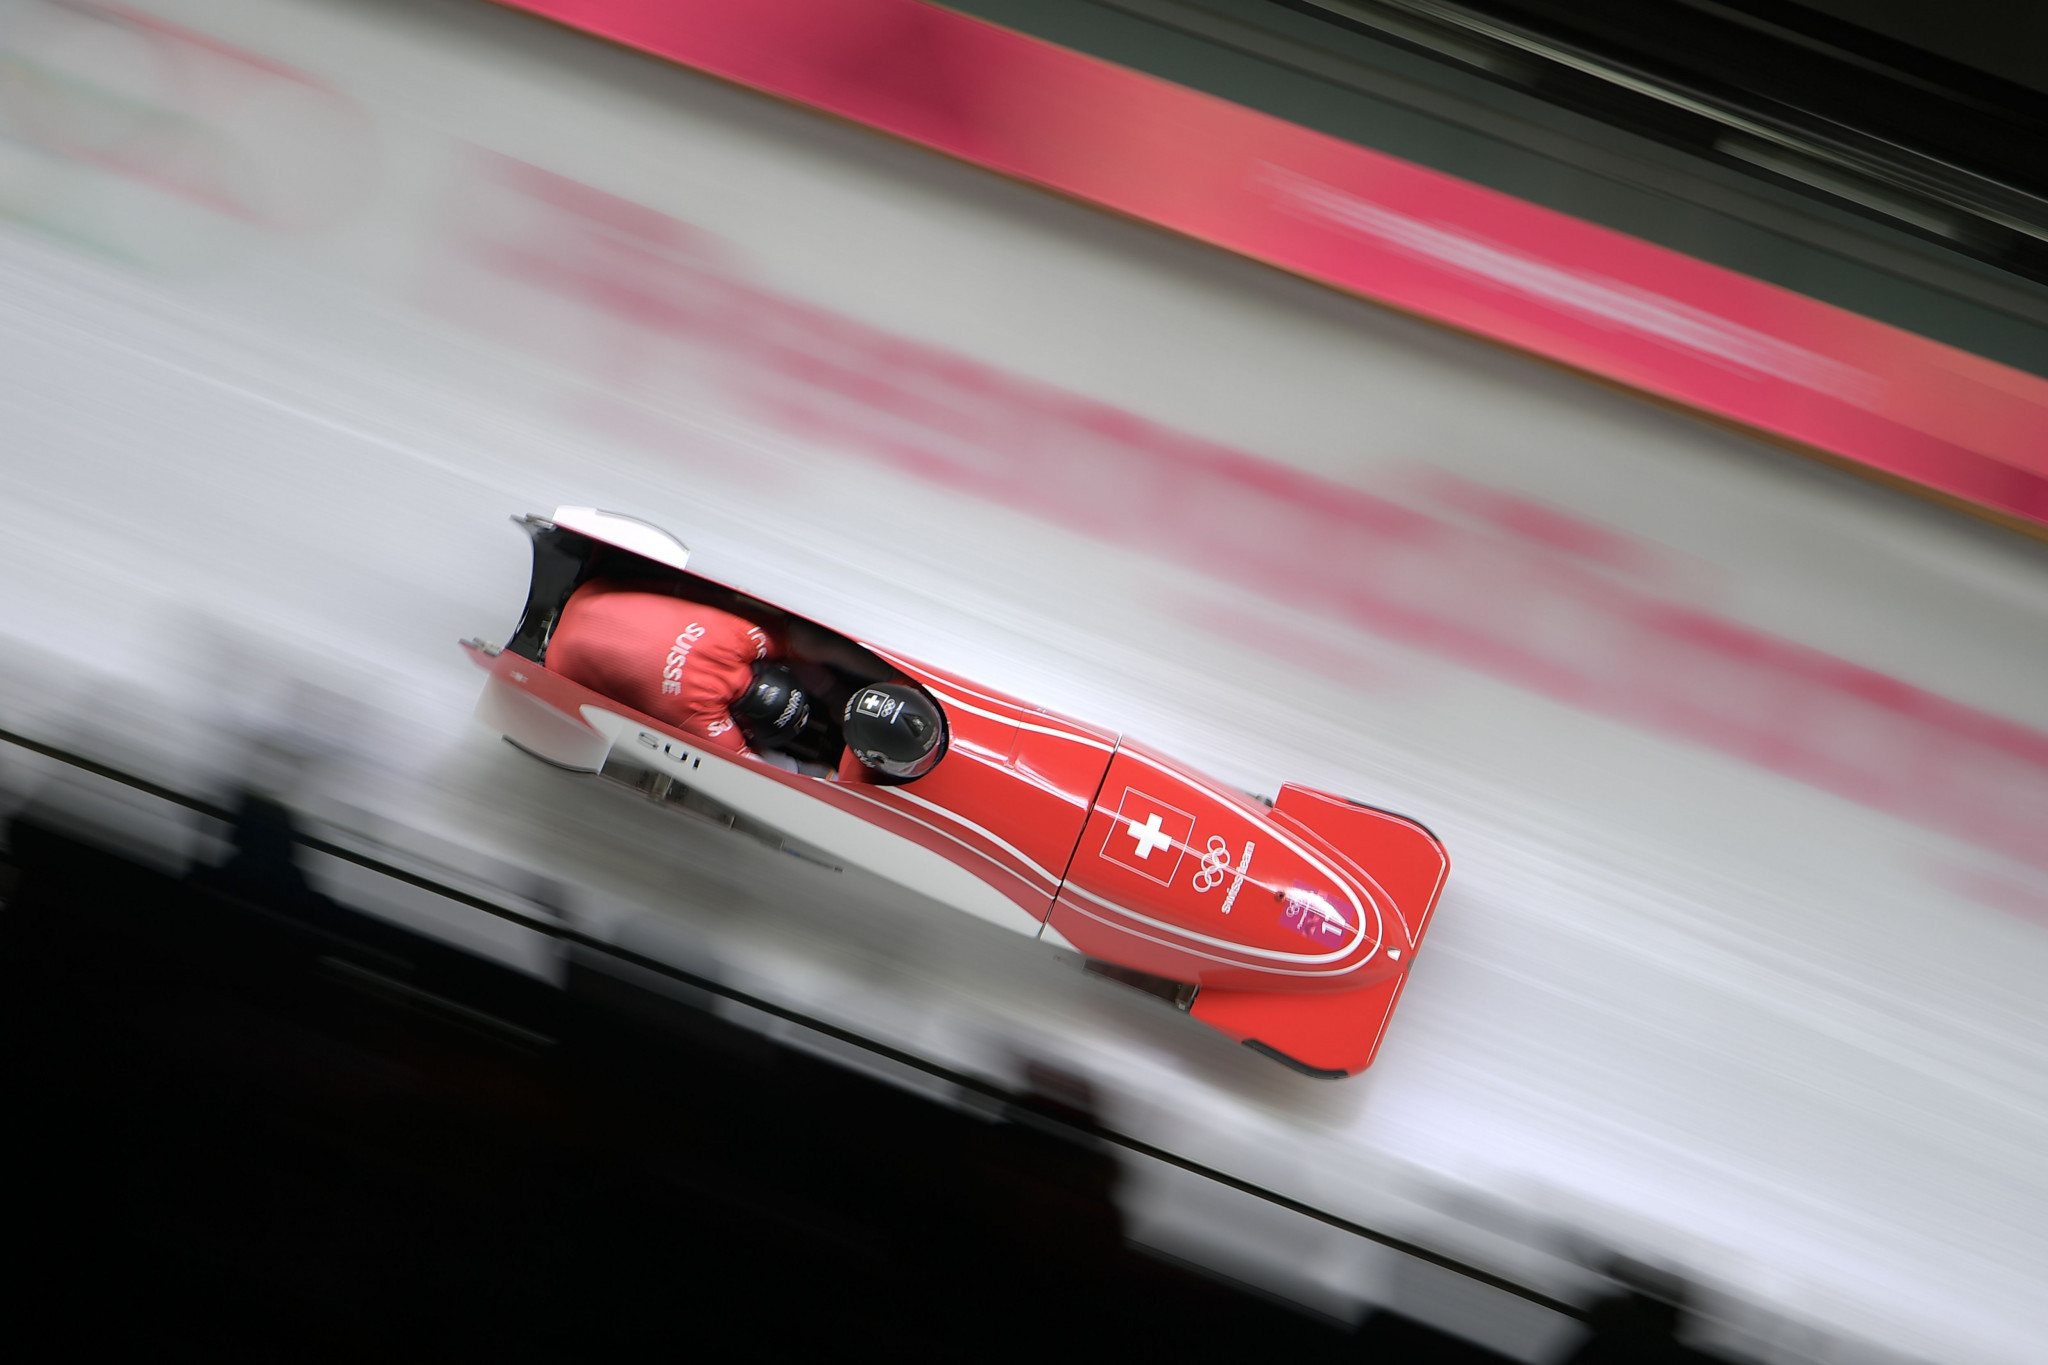 Swiss personnel have also tested positive for COVID-19, but the nation is still poised to field sleds ©Getty Images